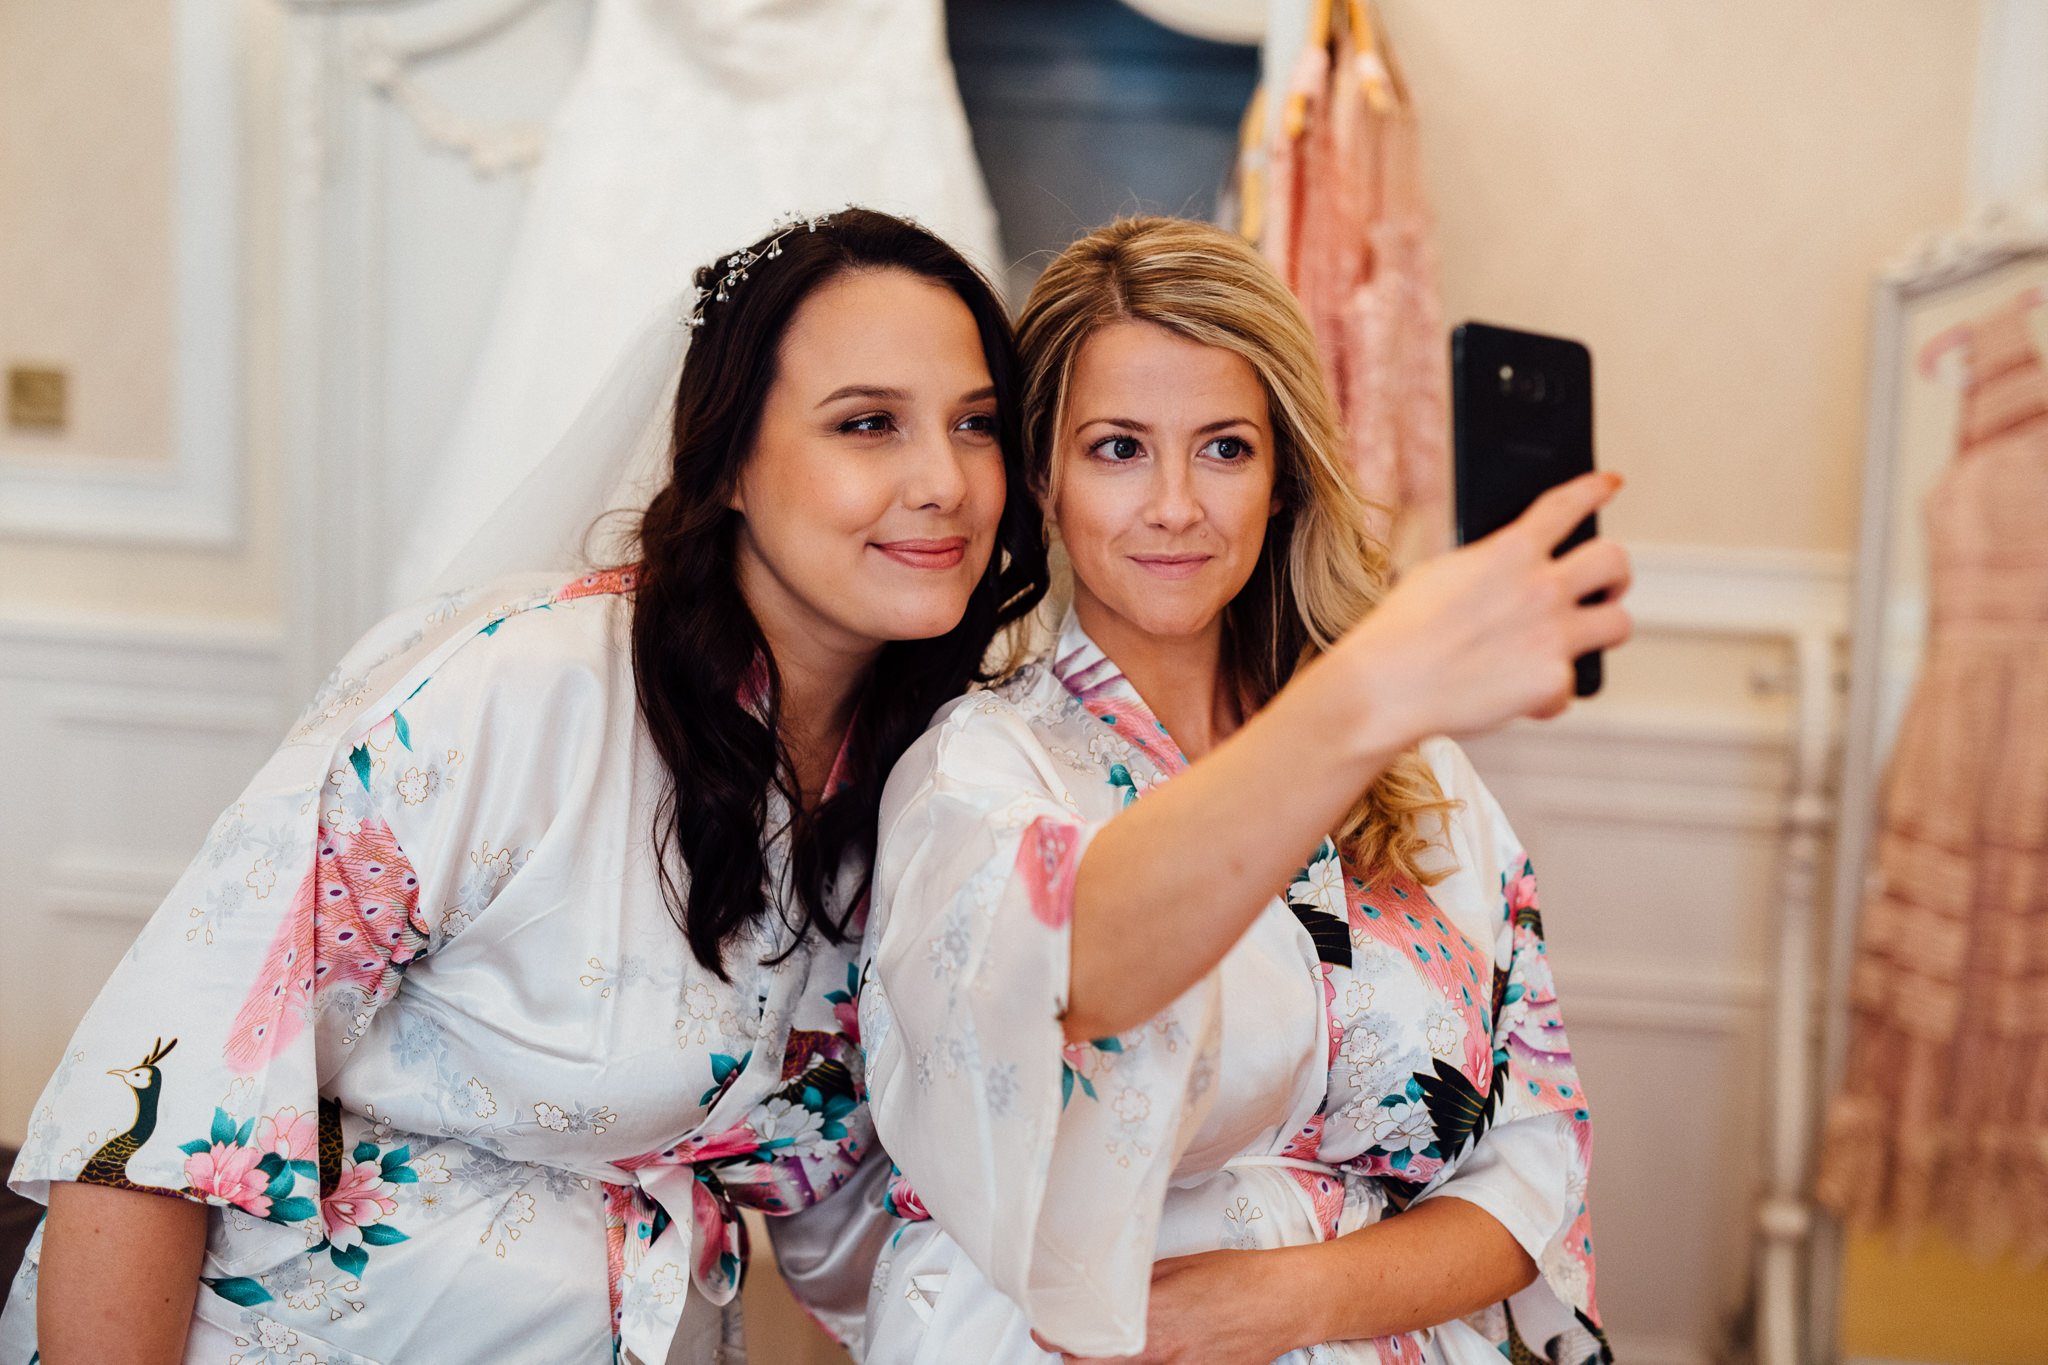  Bride and Bridesmaid taking a selfie 